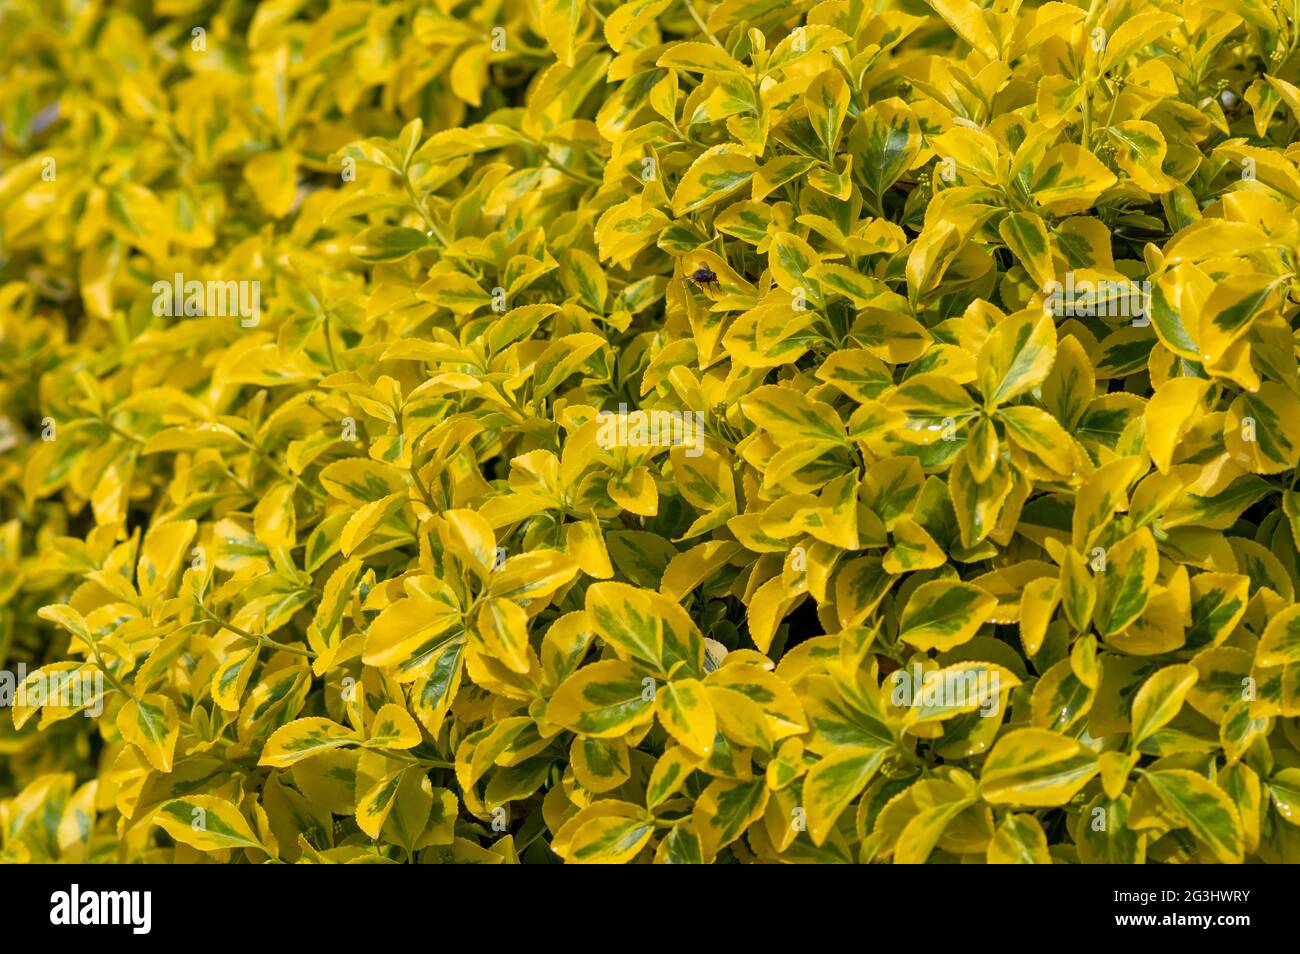 Closeup shot of Euonymus japonicus hedge in a garden Stock Photo